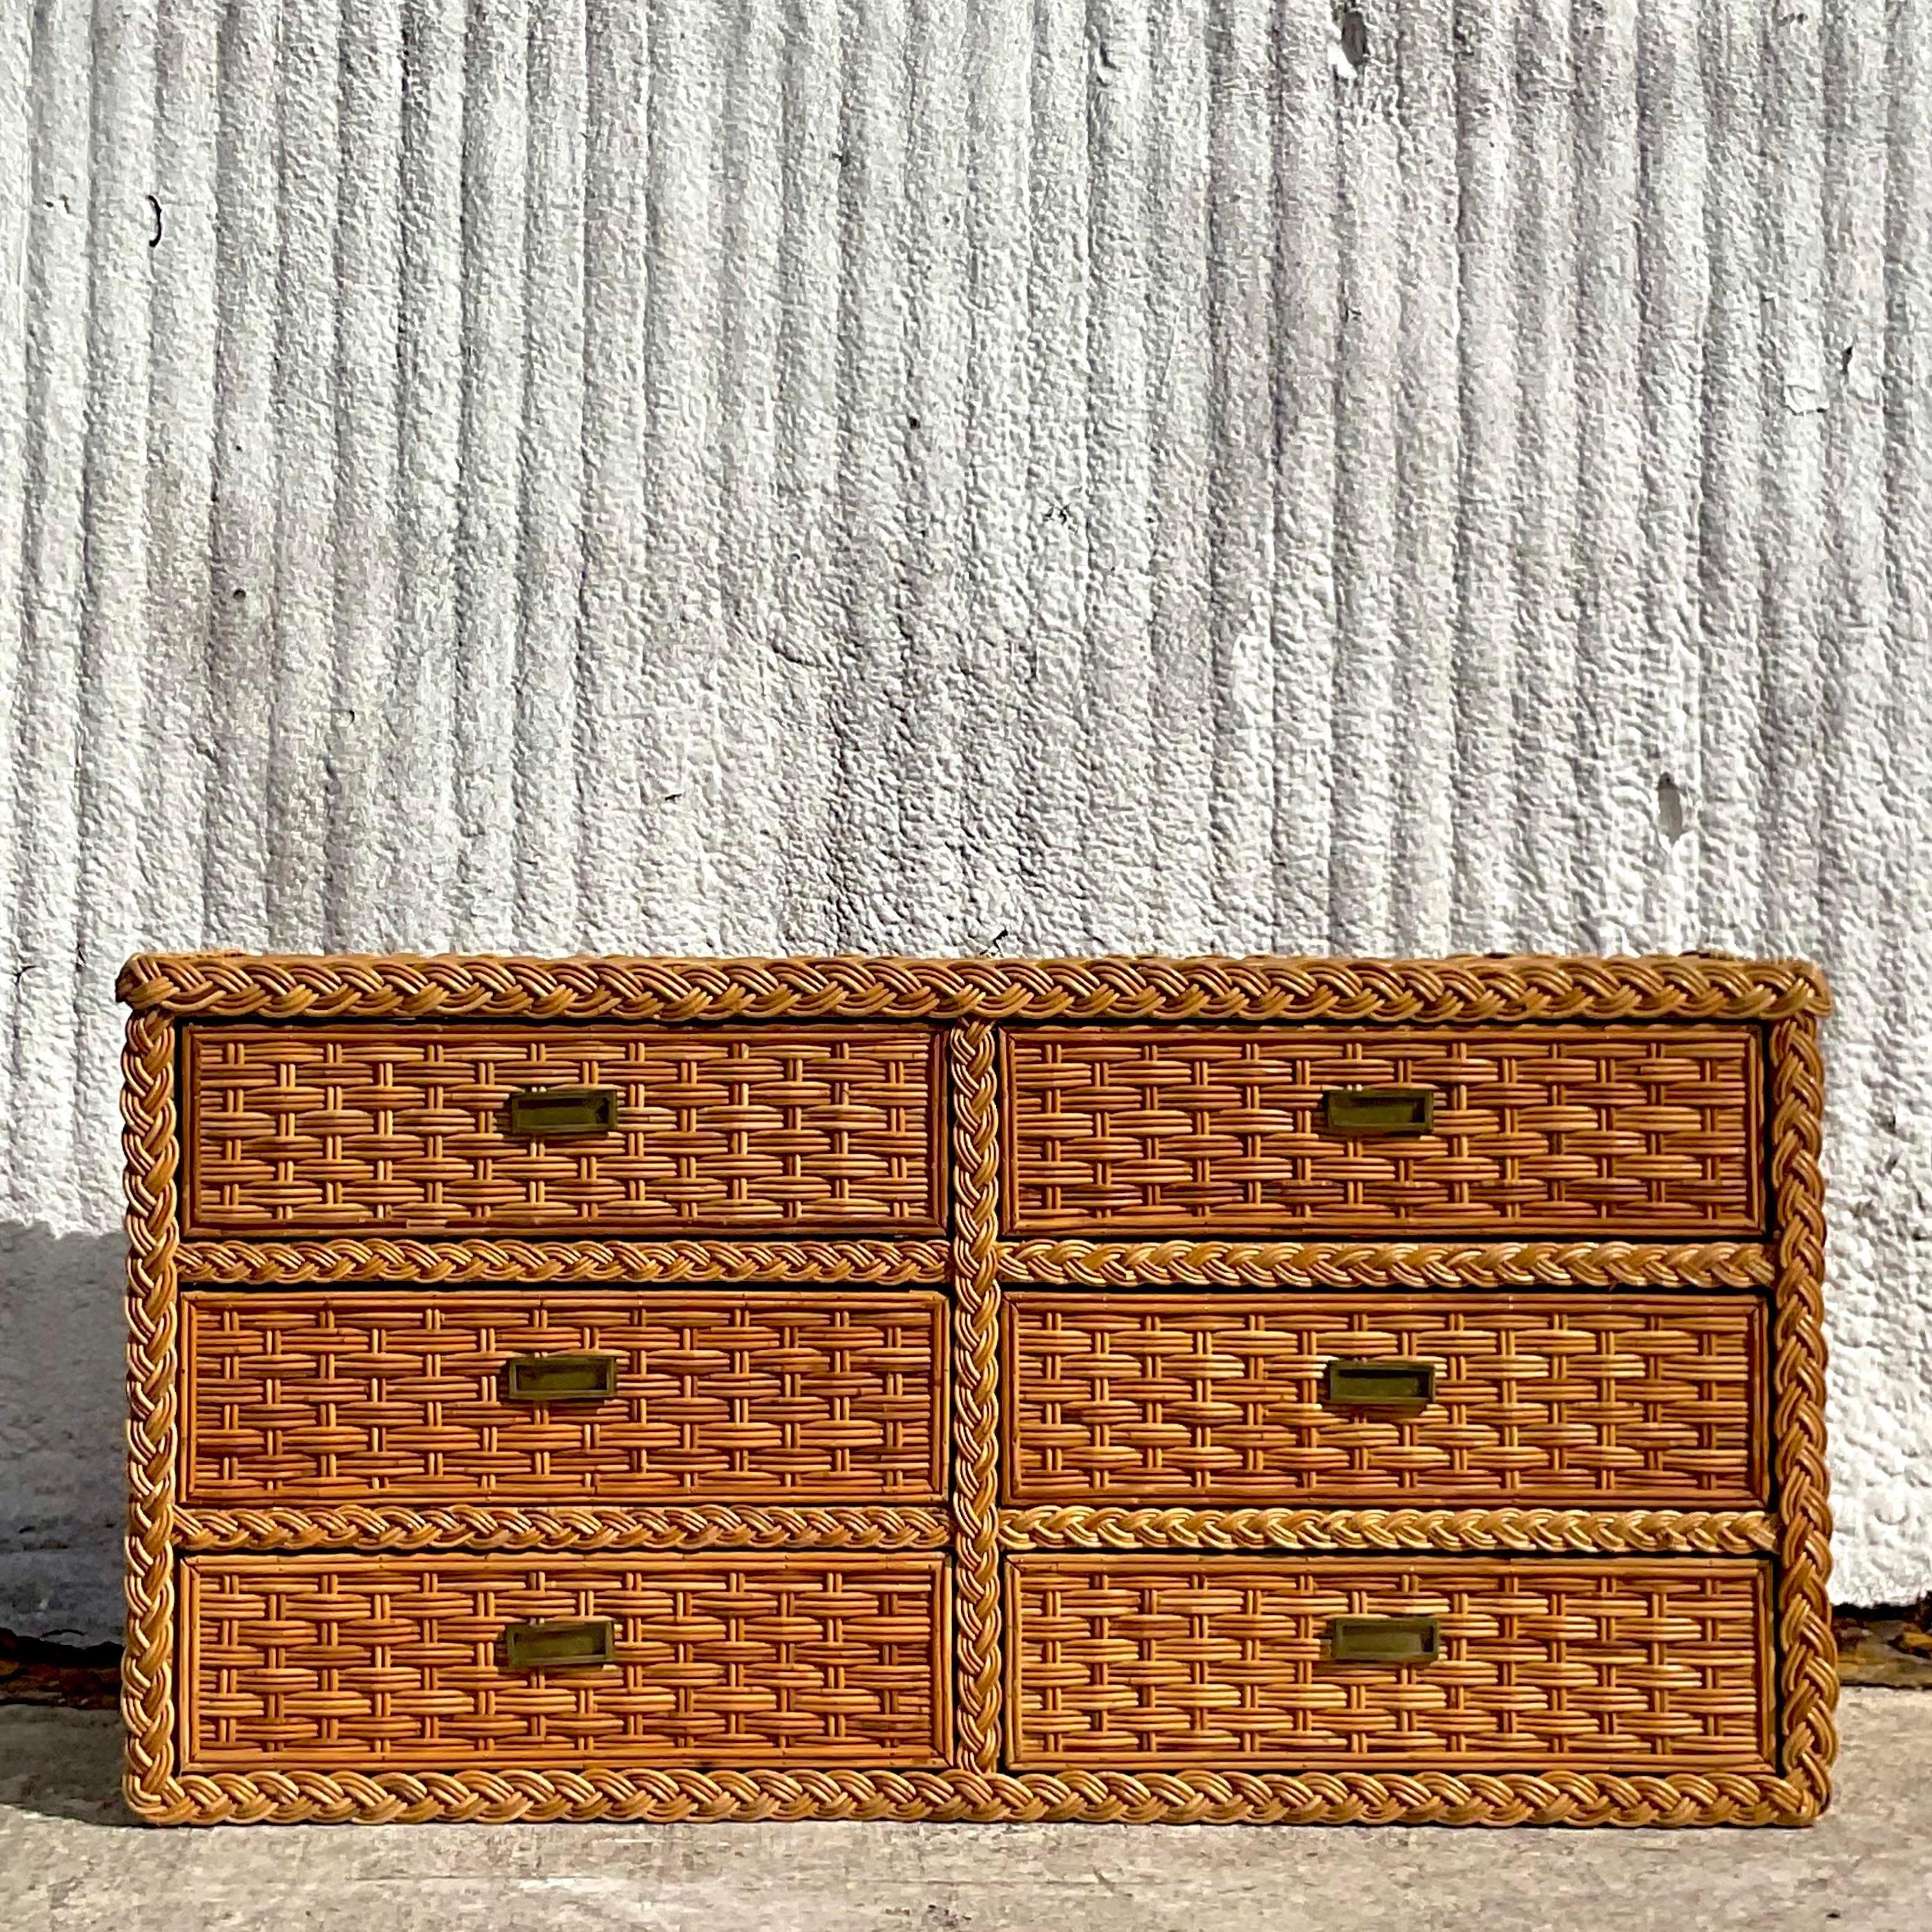 A fantastic vintage Coastal rattan dresser. A chic braided rattan motif with a beautiful patina from time. Coordinating nightstands also available on my page. Acquired from a Palm Beach estate. 